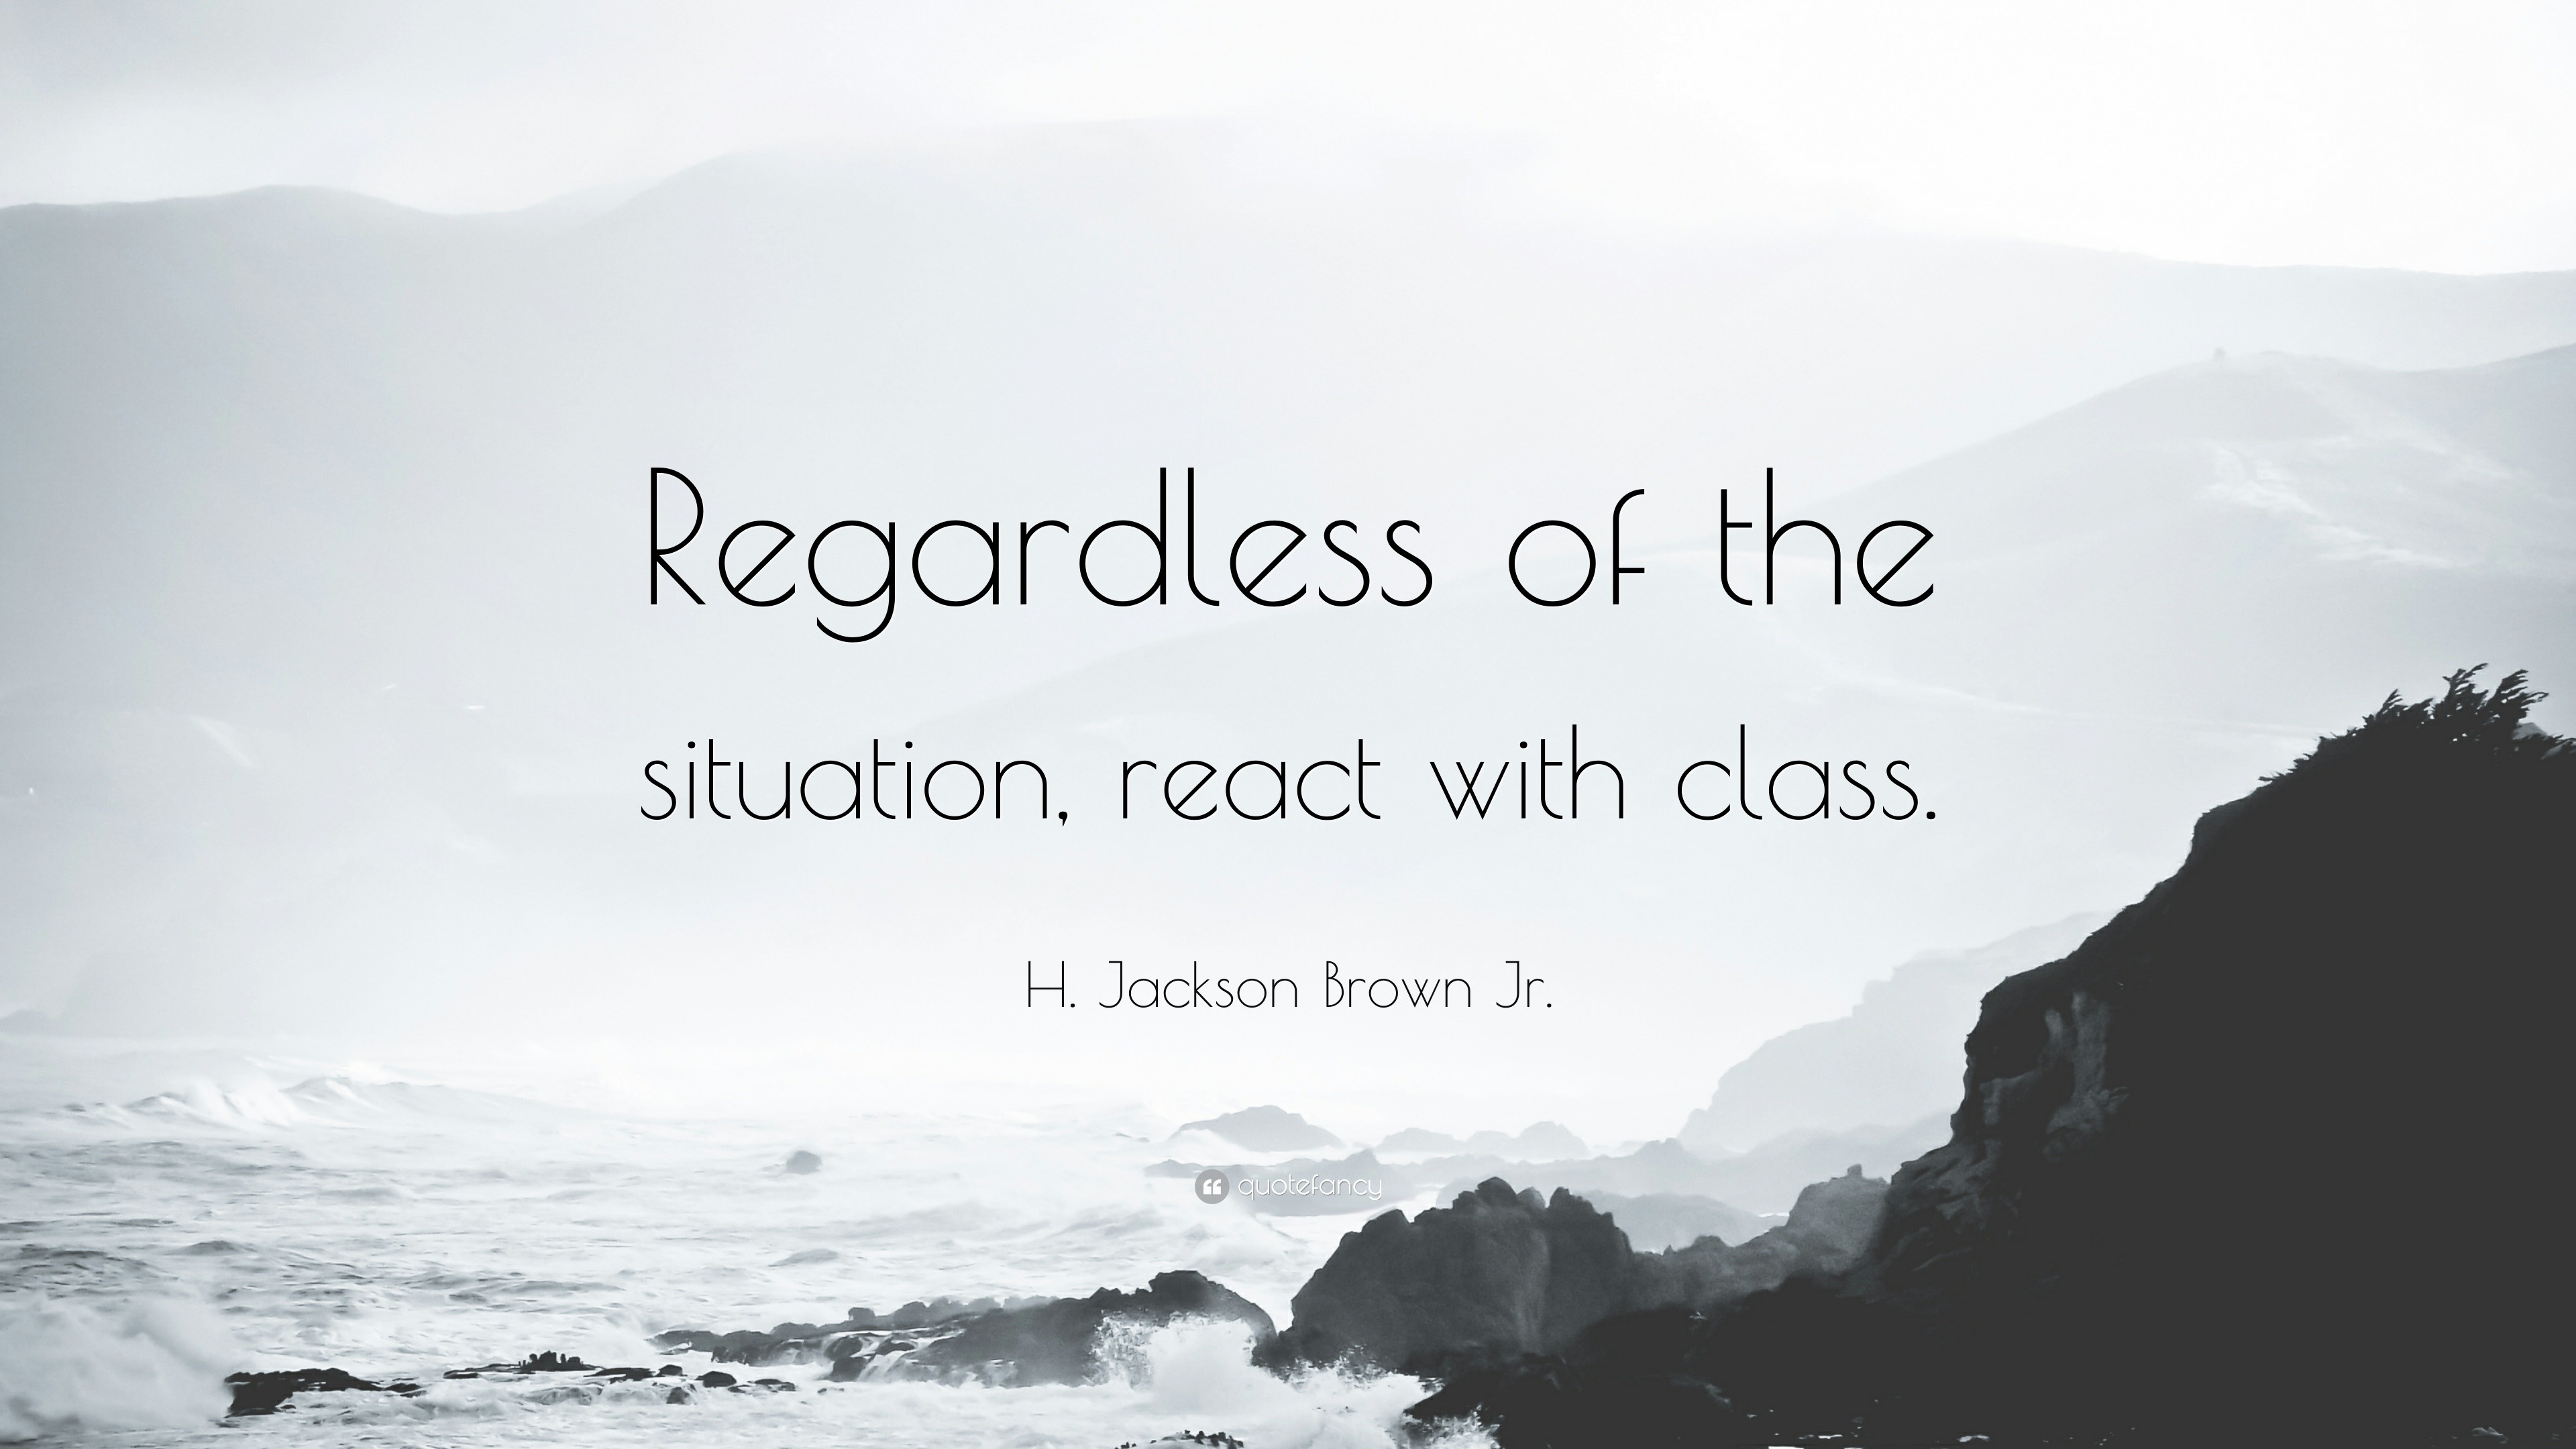 H. Jackson Brown Jr. Quote “Regardless of the situation, react with